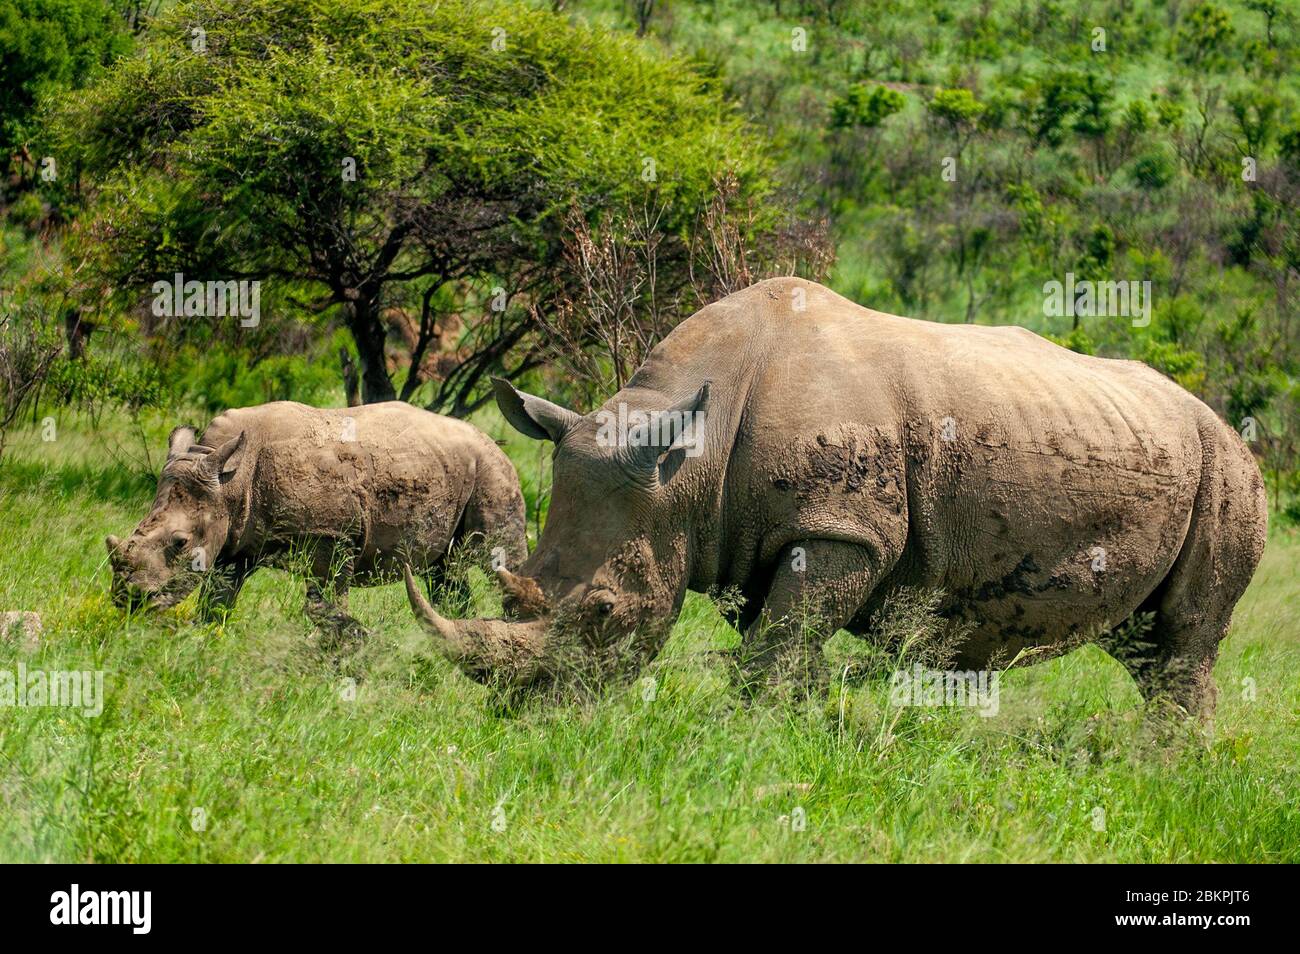 Wild Rhinoceros in South African Game Reserve Stockfoto